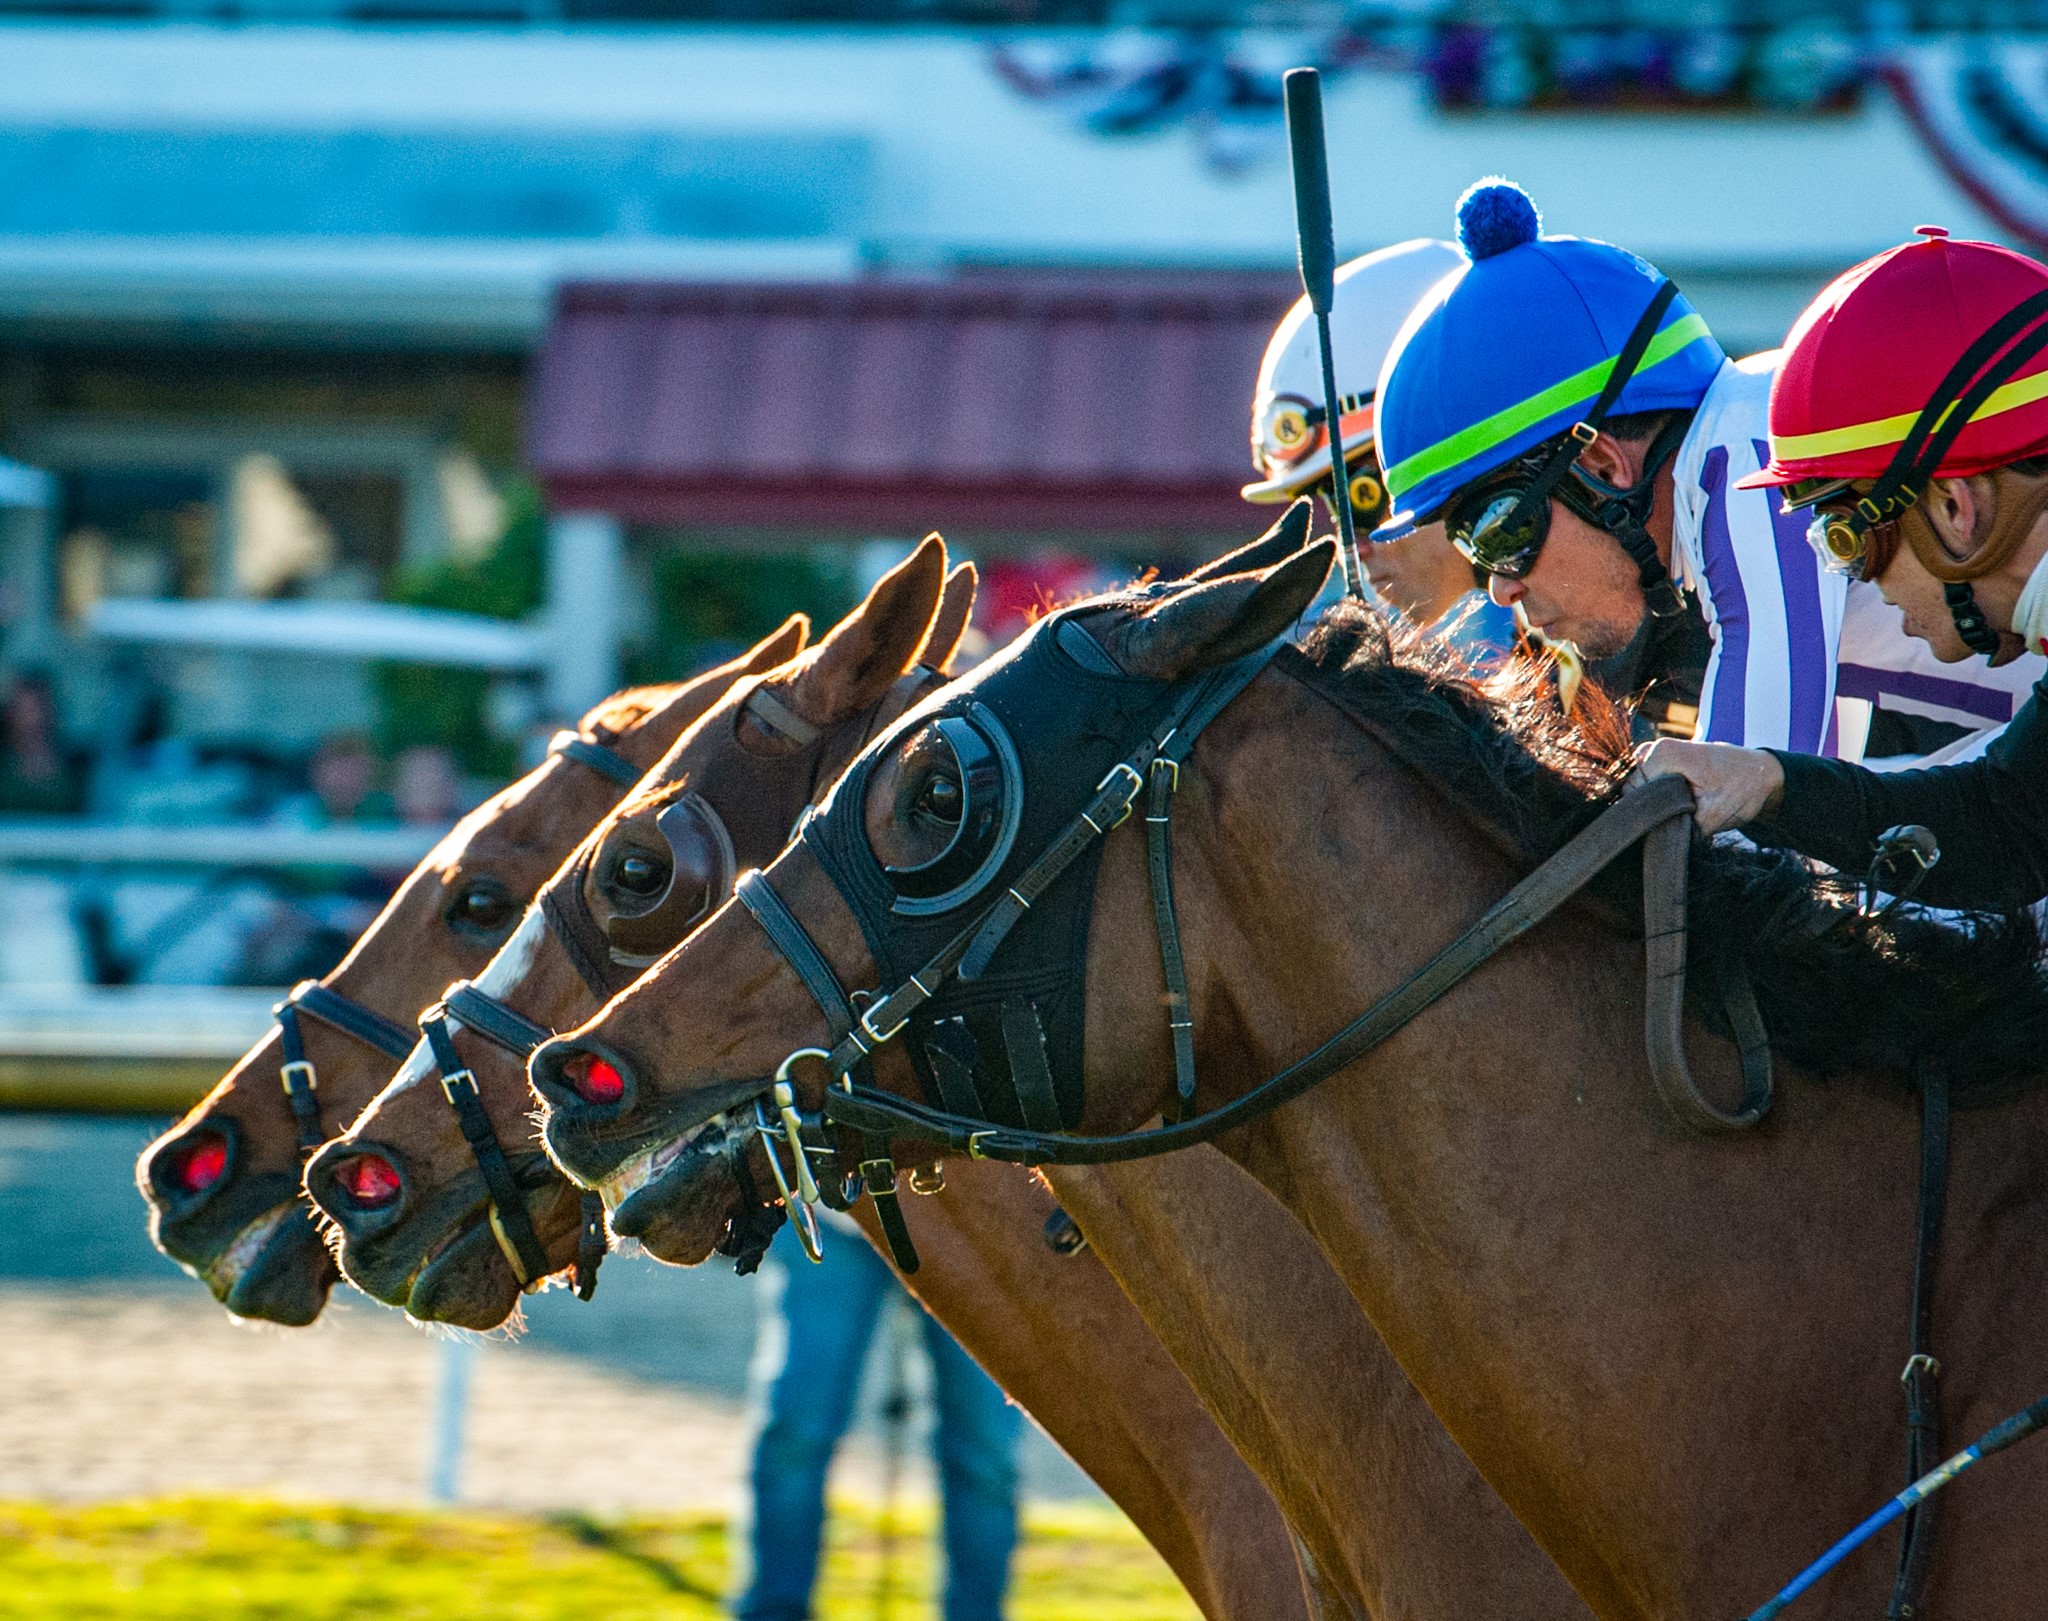 "Three Noses at the Wire" (Tampa Bay Downs, Tampa, FL - February 8, 2020), photograph by Sophie Shore